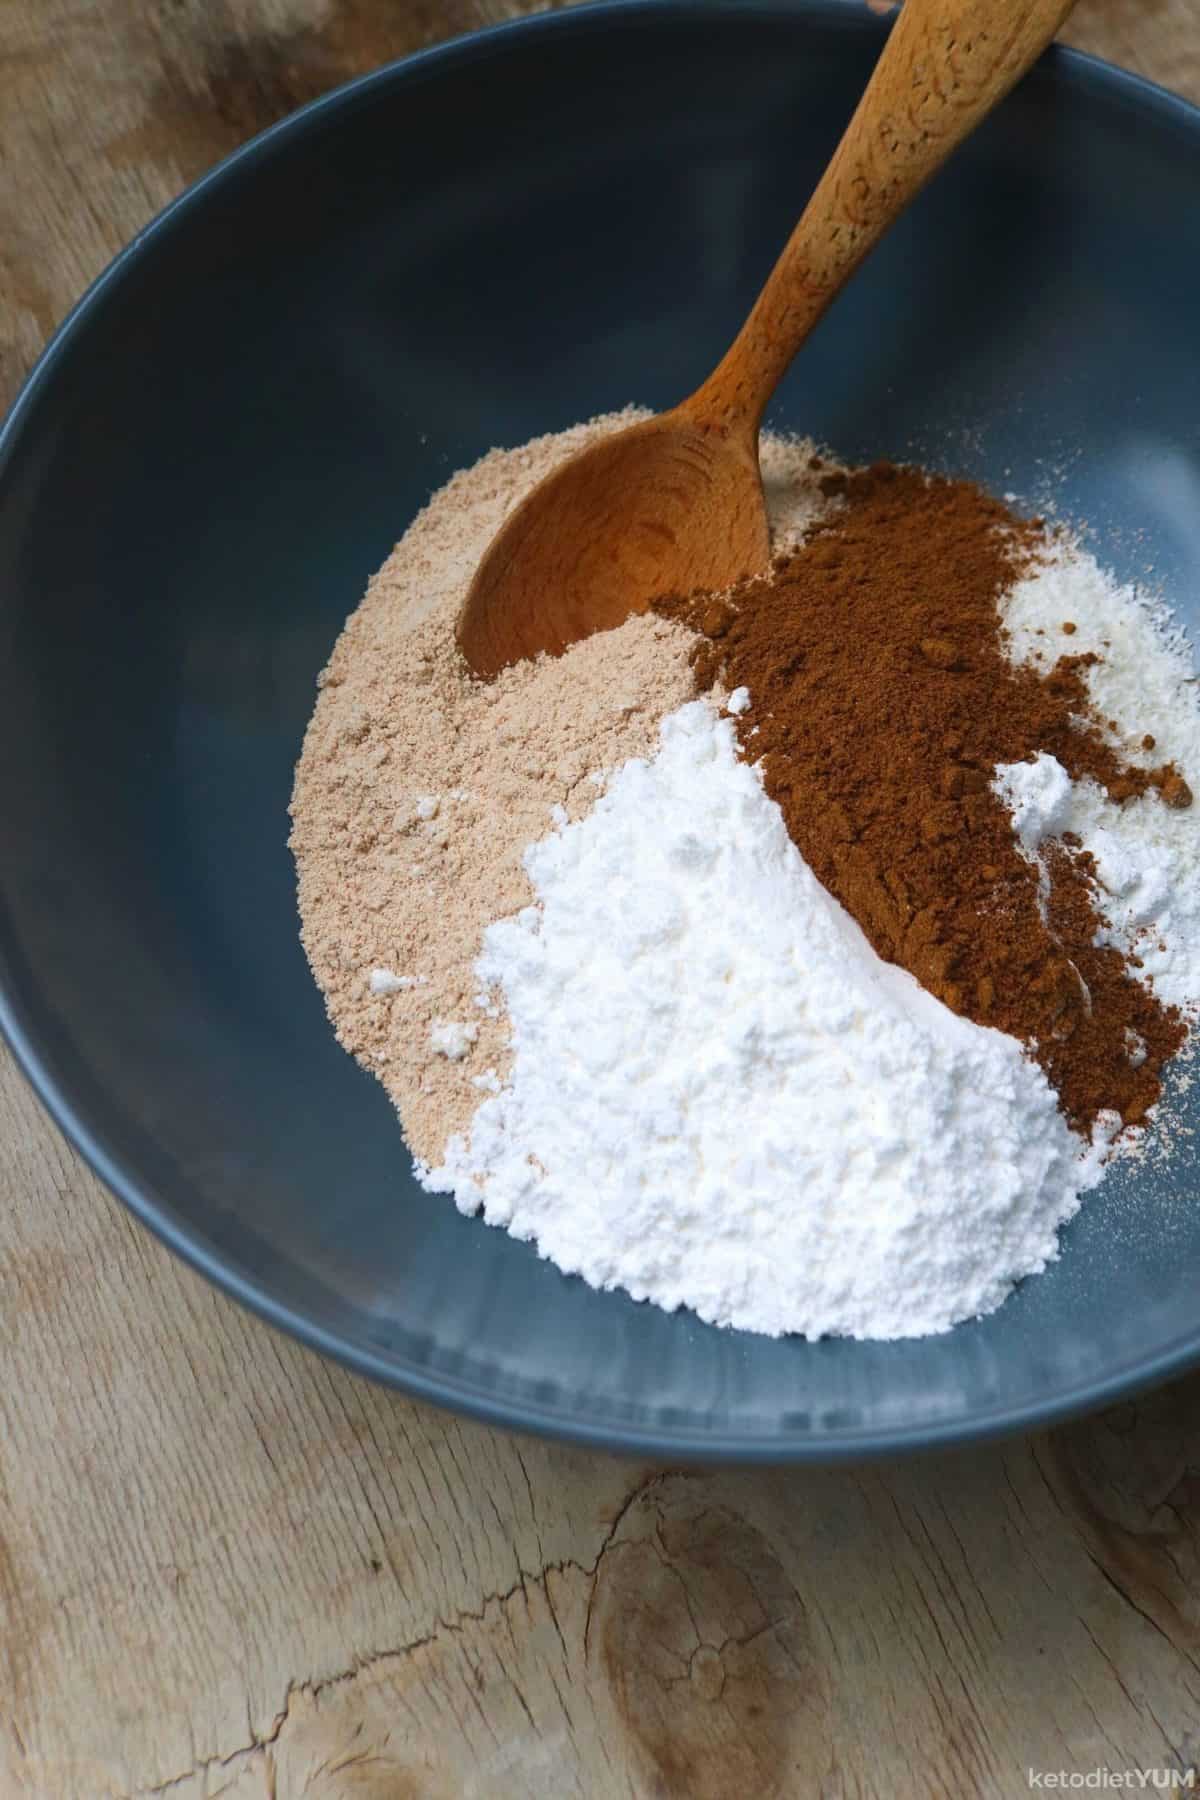 Dry ingredients being combined in a mixing bowl to make cookies